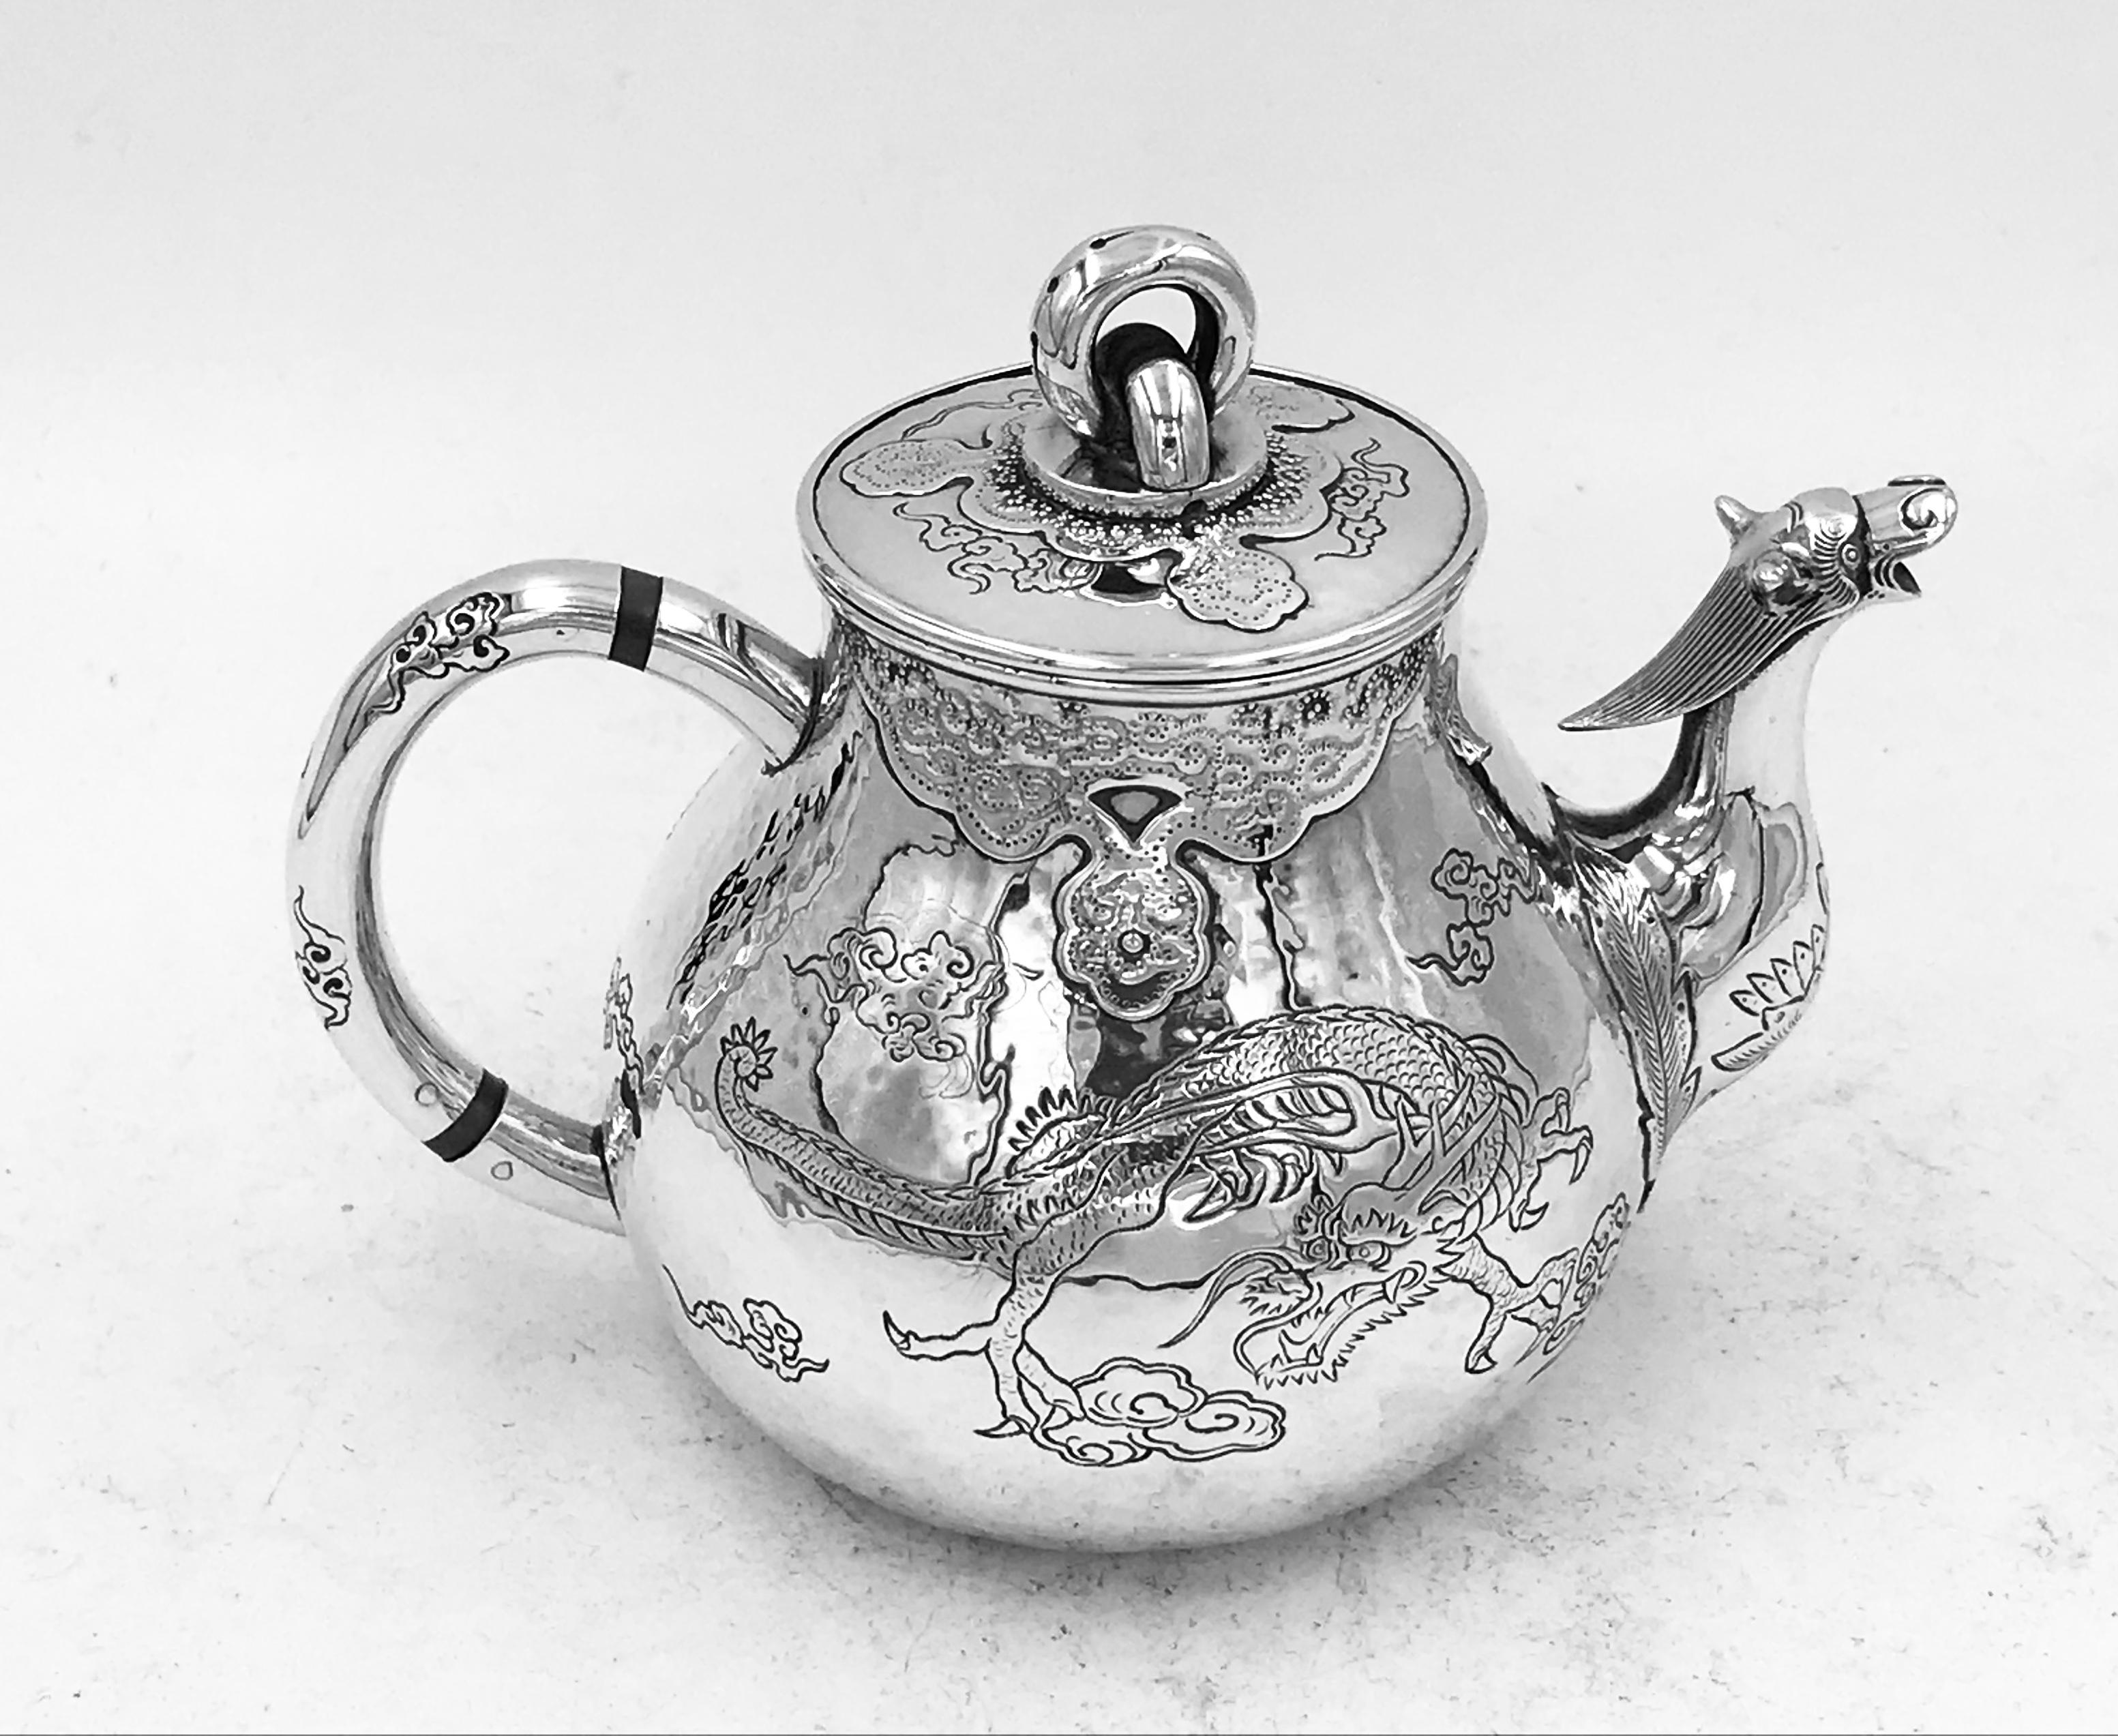 A small Chinese silver teapot made by Ring Sheng, from the Yuan Nan province, circa 1900. There is a dragon engraved to either side and a dragon-head spout.
The teapot weighs 132gms.